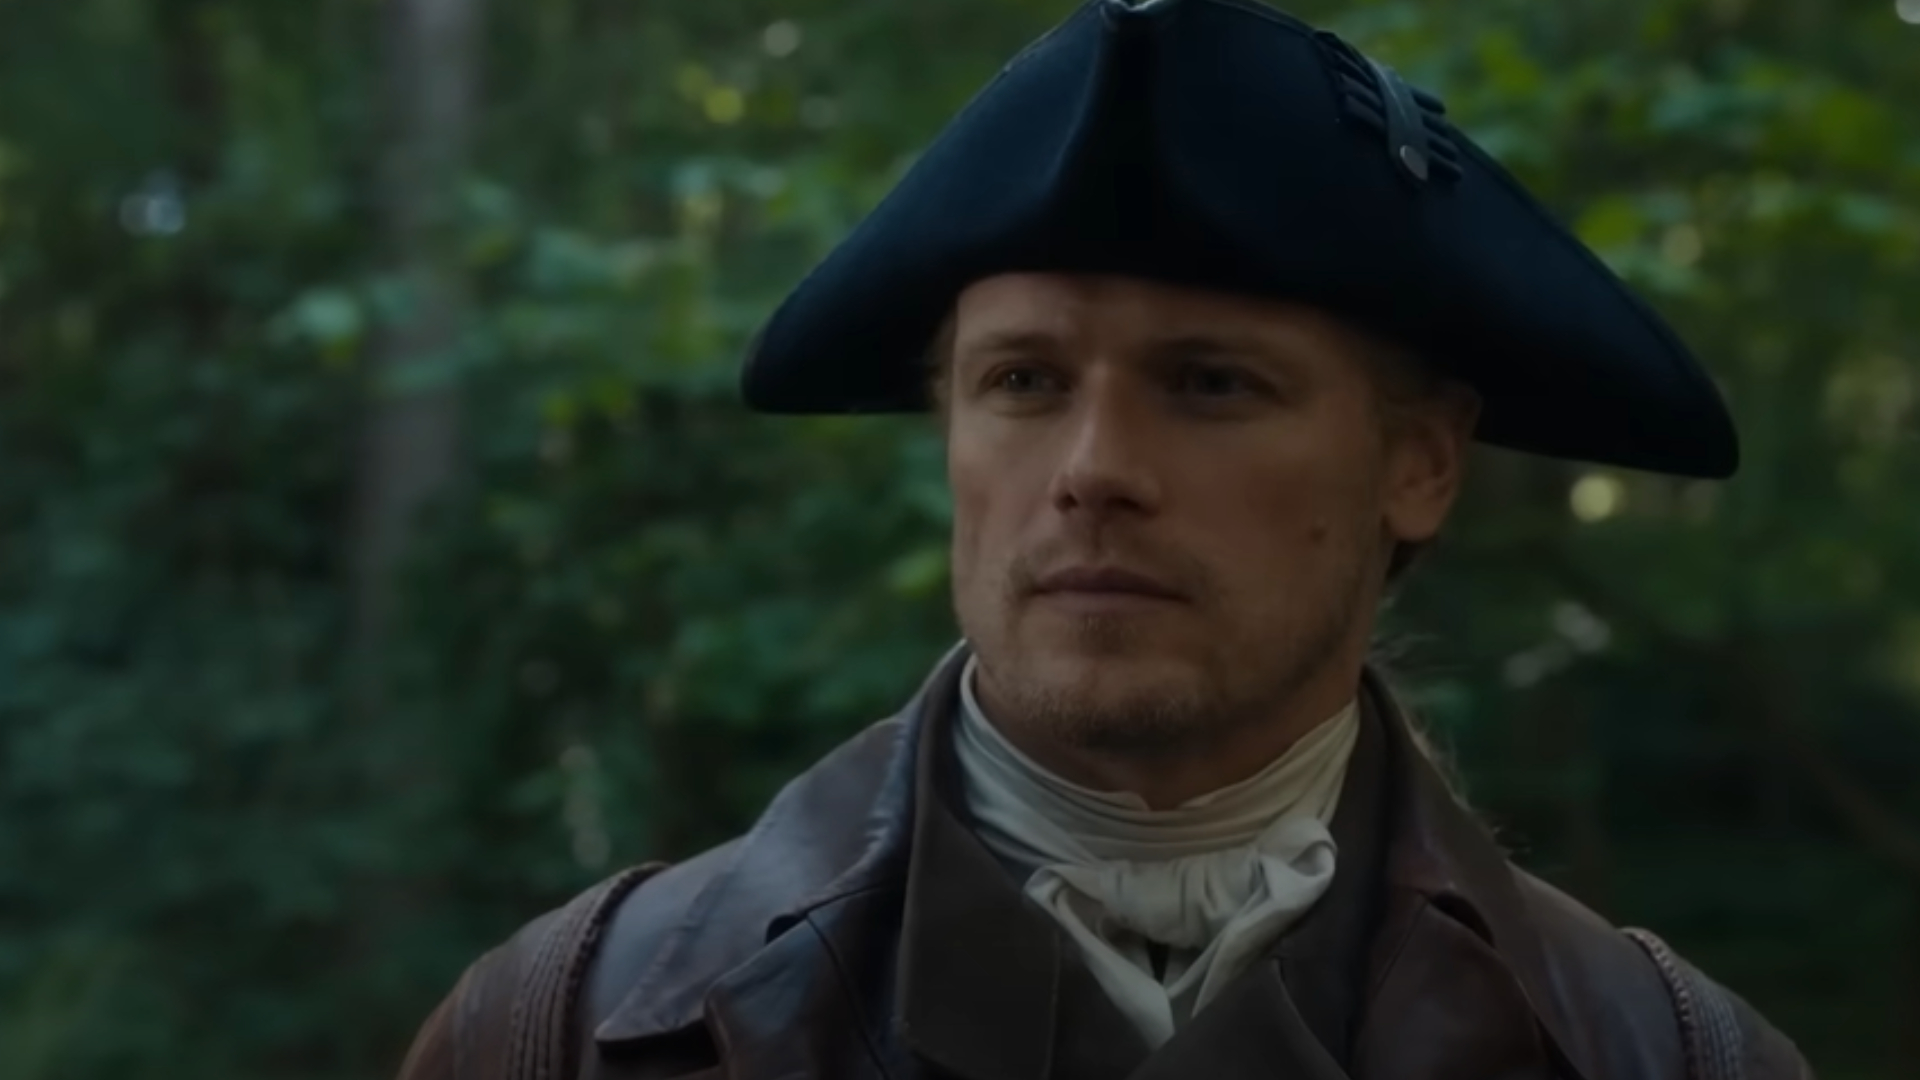  Outlander season 7 will feature some secret returning characters 